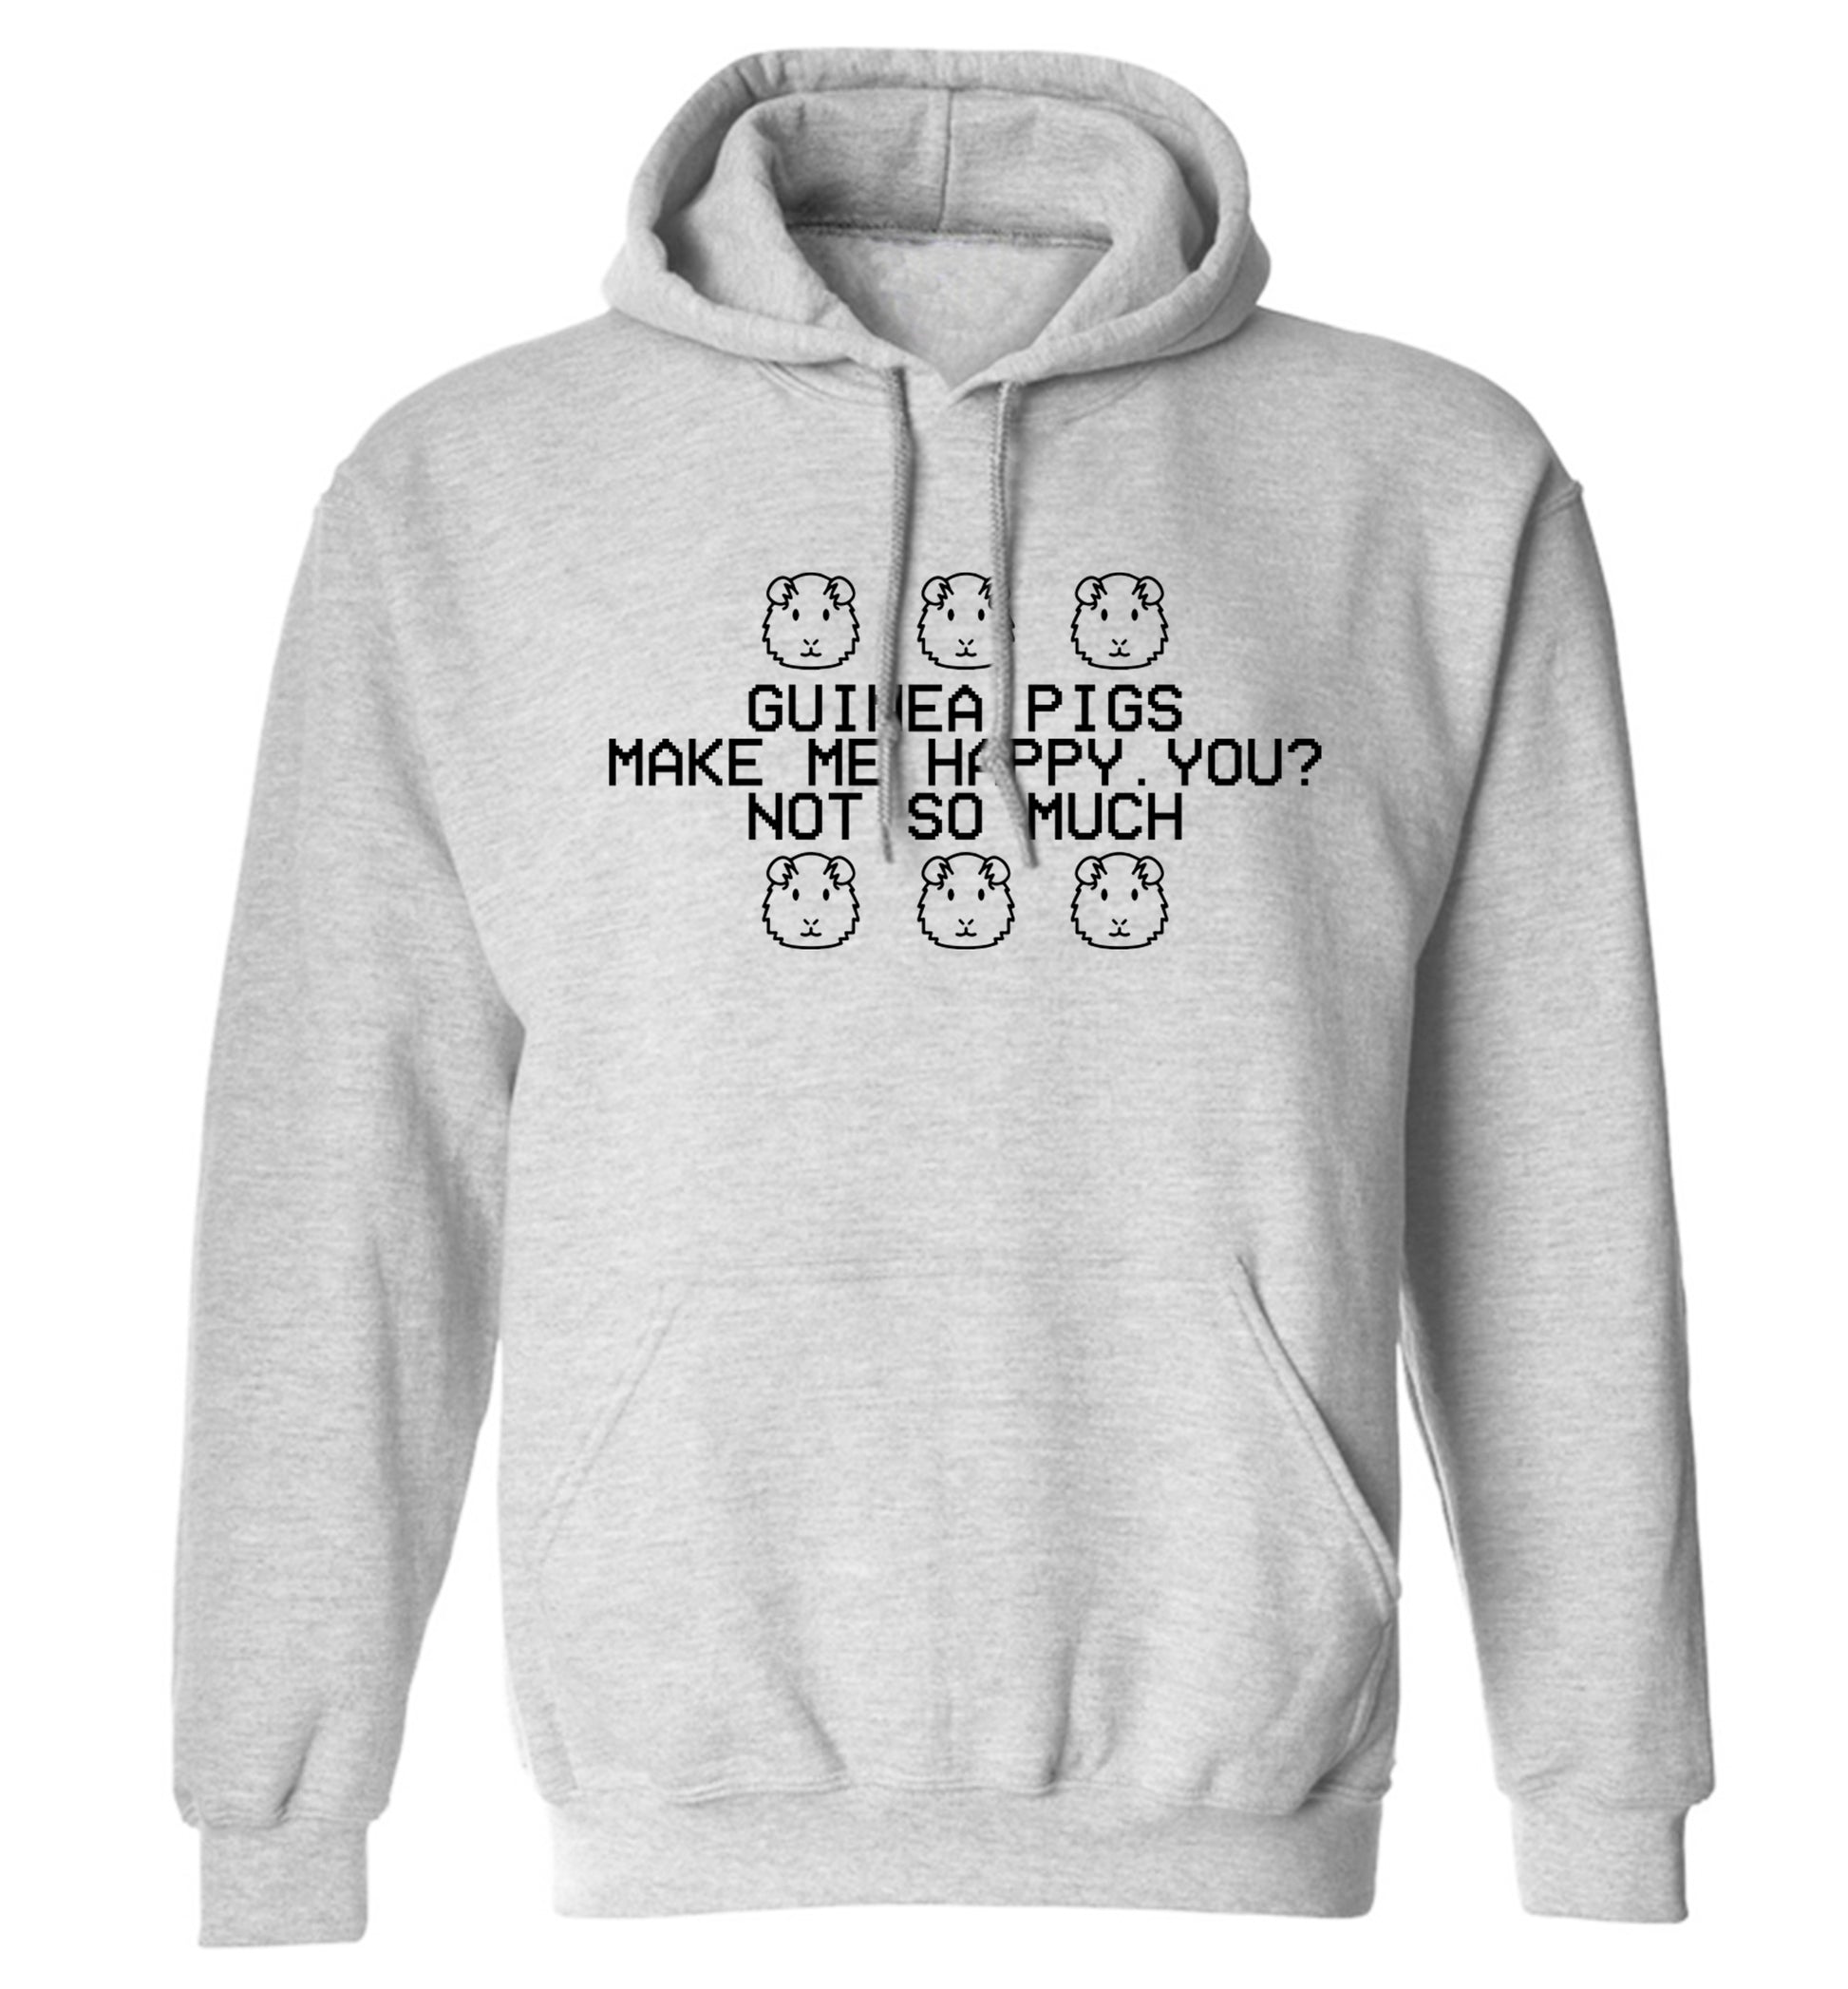 Guinea pigs make me happy, you not so much adults unisex grey hoodie 2XL